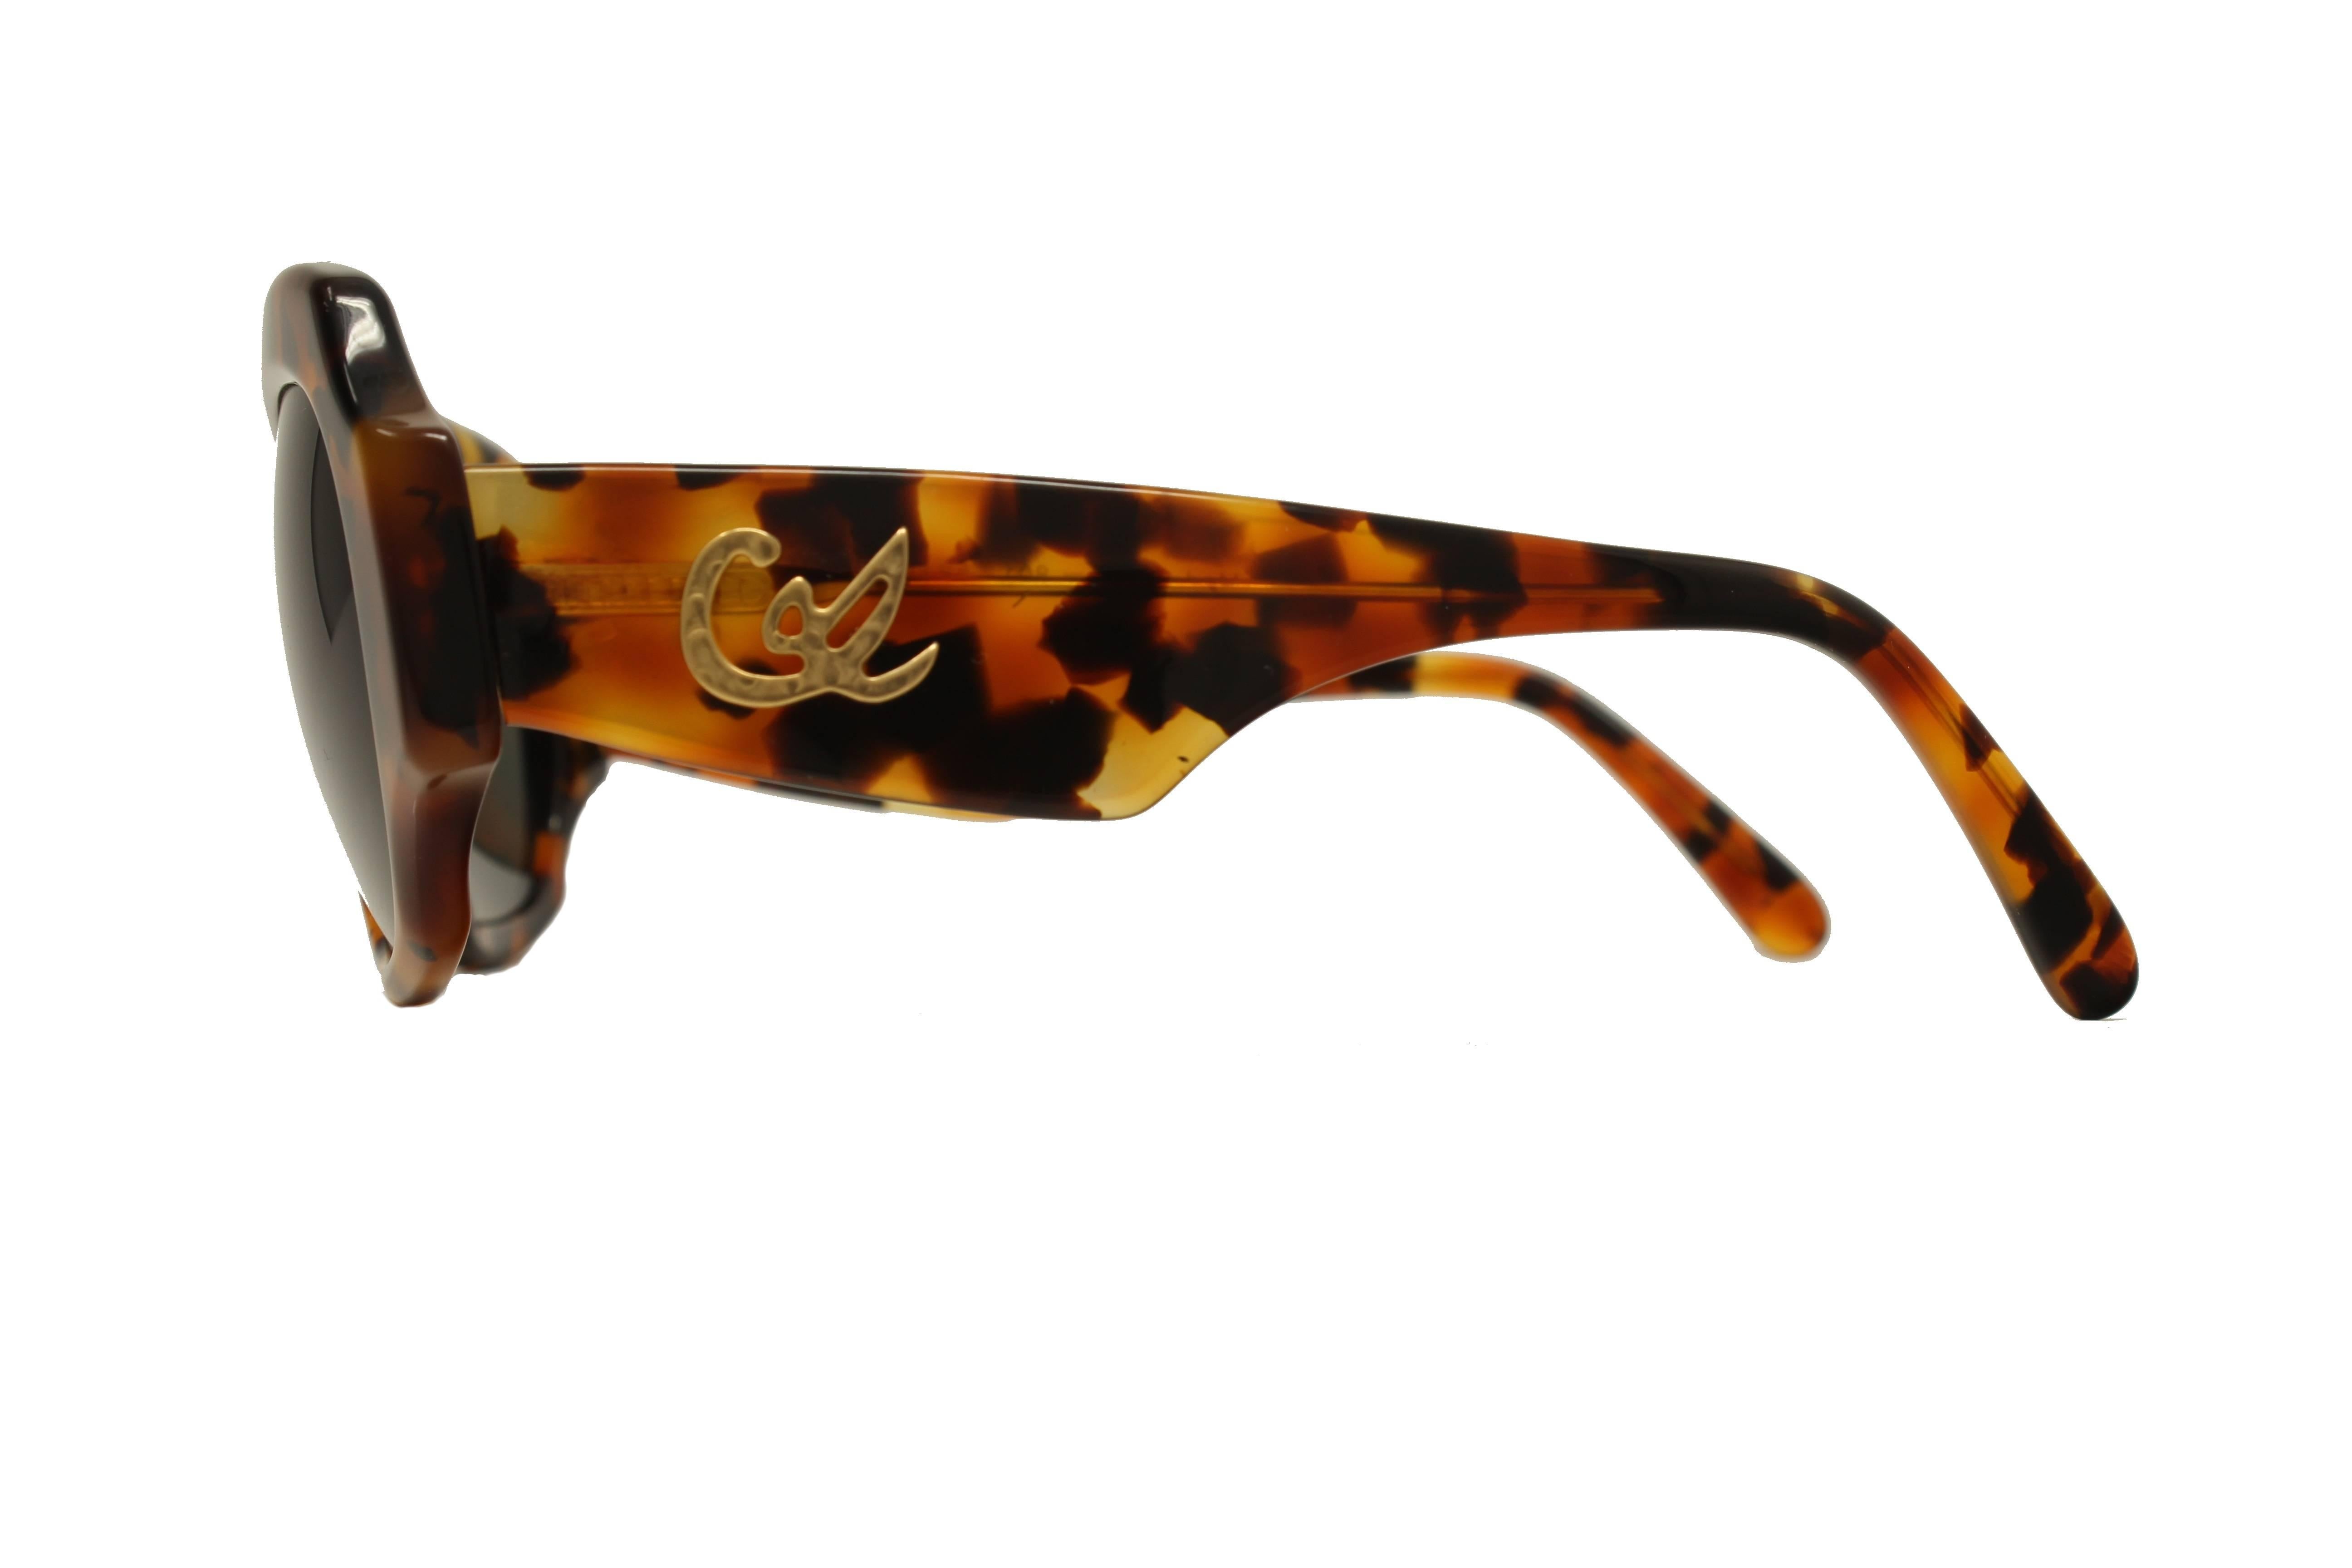 New Vintage Christian Lacroix Sunglasses. Classical square shape, delightful colour in acetate.
Both temples have the designer signature. Never worn.

Measurements
- Distance between temples = 130 mm
- Temple length = 120 mm
- Horizontal diameter of